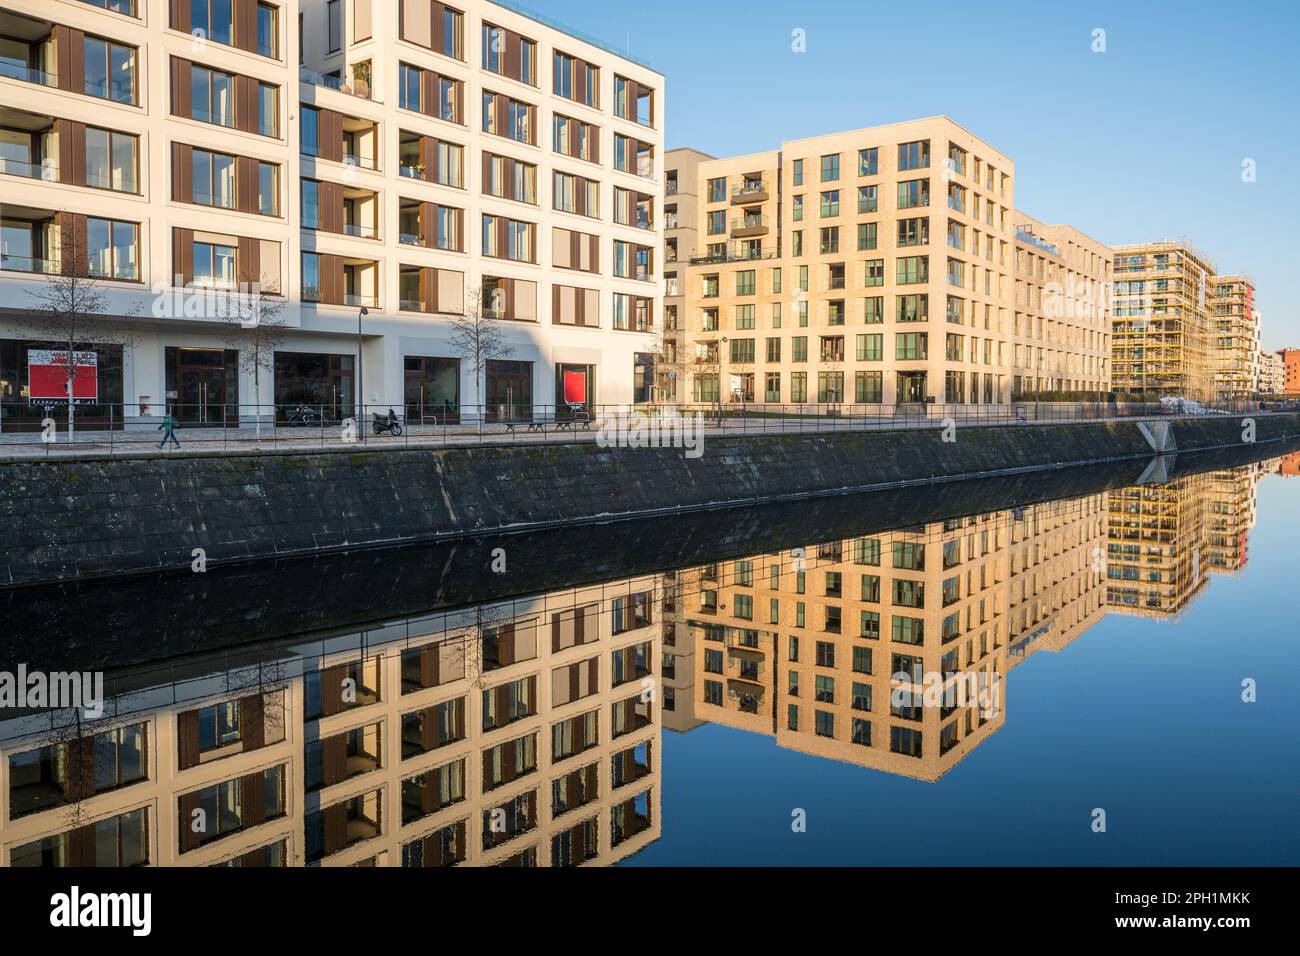 New apartment buildings in Berlin reflected in a small canal Stock Photo